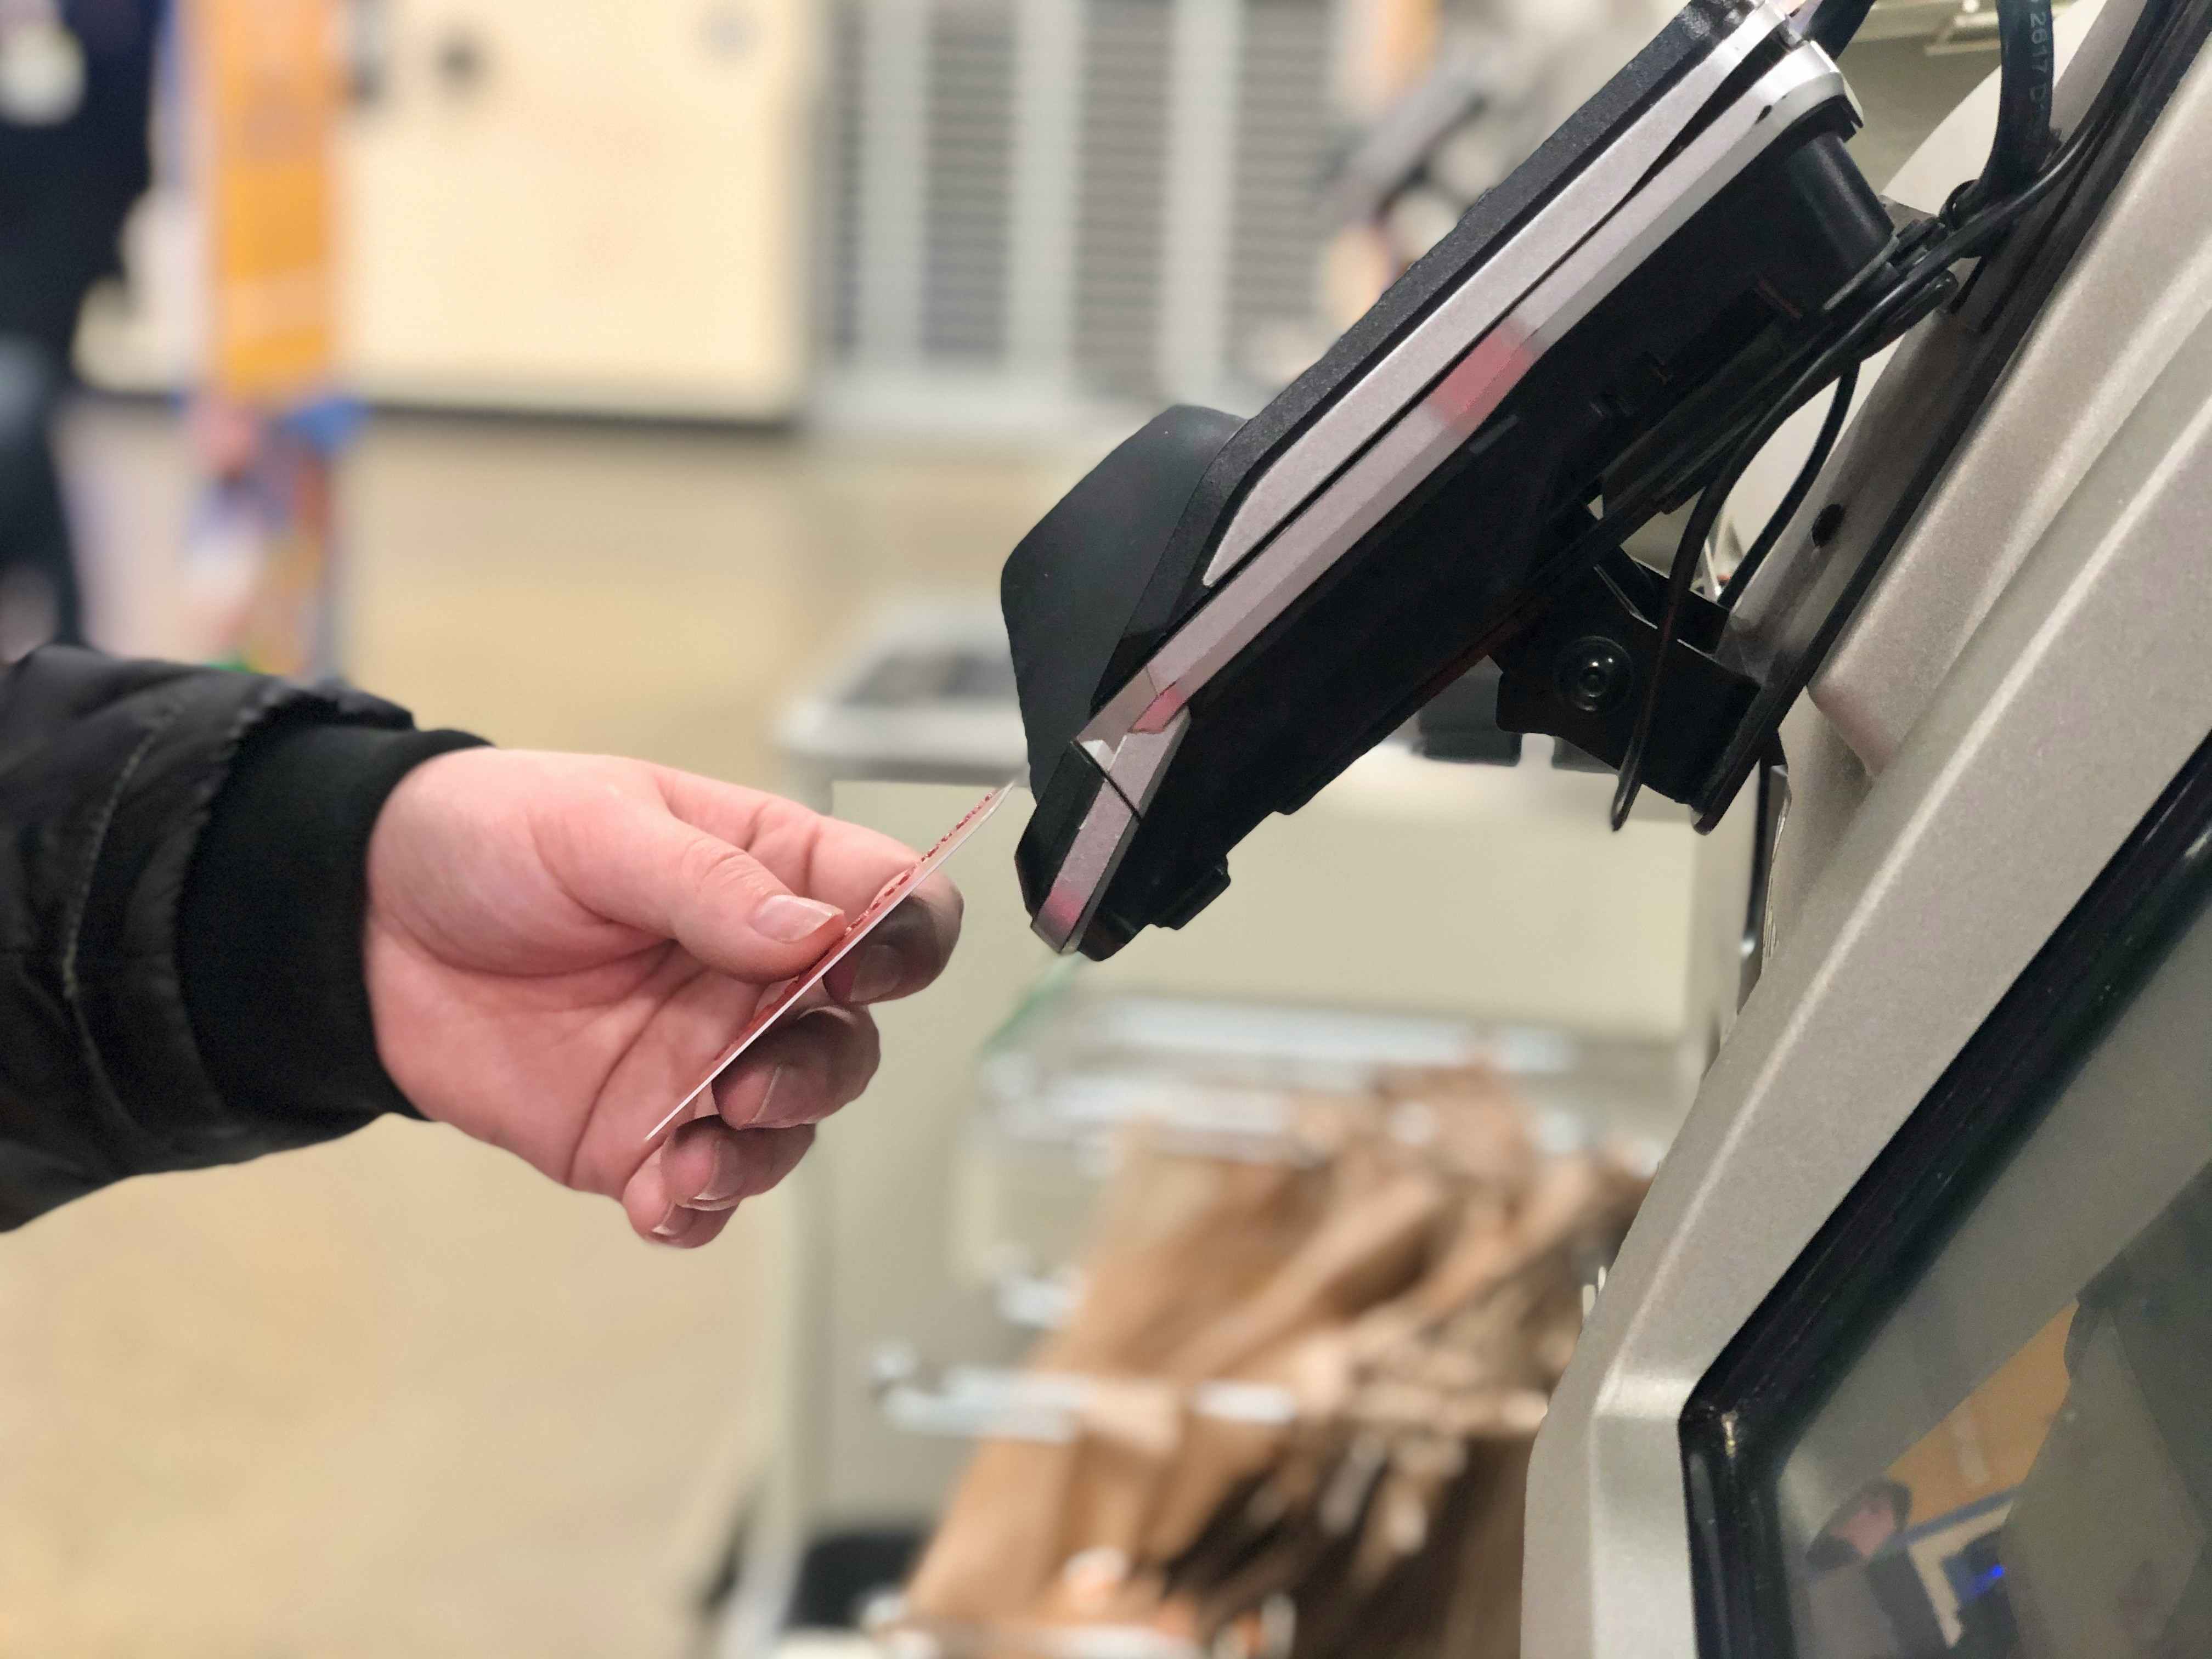 shopper paying at store checkout with credit card